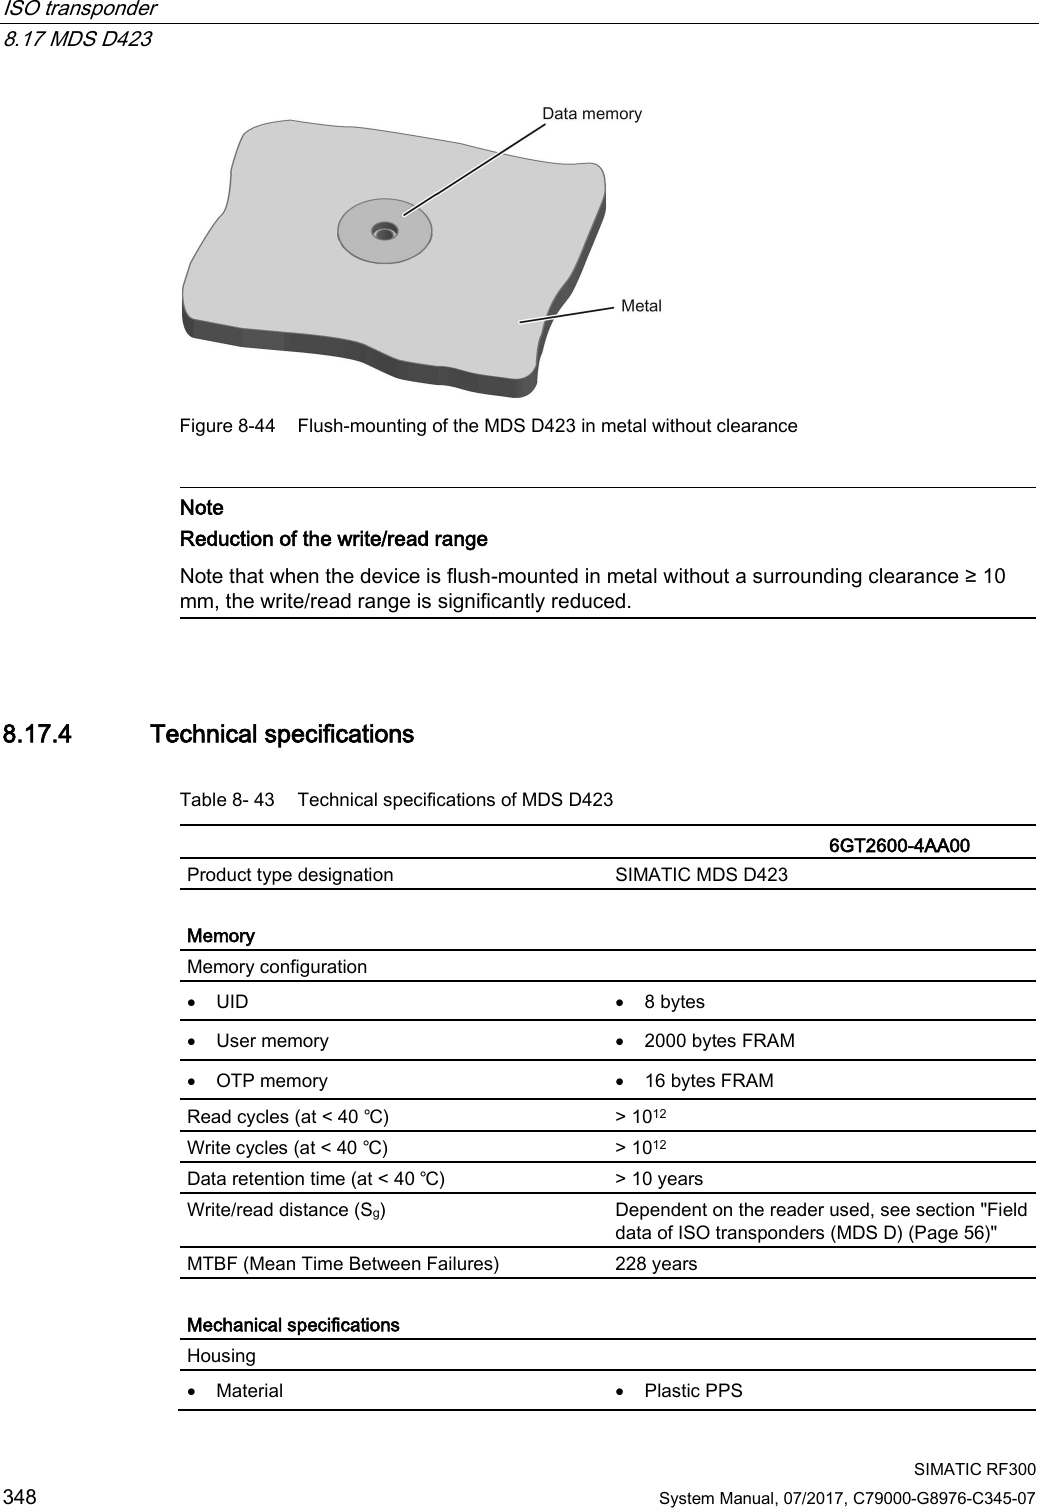 ISO transponder   8.17 MDS D423  SIMATIC RF300 348 System Manual, 07/2017, C79000-G8976-C345-07  Figure 8-44 Flush-mounting of the MDS D423 in metal without clearance   Note Reduction of the write/read range  Note that when the device is flush-mounted in metal without a surrounding clearance ≥ 10 mm, the write/read range is significantly reduced.  8.17.4 Technical specifications Table 8- 43 Technical specifications of MDS D423    6GT2600-4AA00 Product type designation SIMATIC MDS D423  Memory Memory configuration  • UID • 8 bytes • User memory • 2000 bytes FRAM • OTP memory • 16 bytes FRAM Read cycles (at &lt; 40 ℃) &gt; 1012 Write cycles (at &lt; 40 ℃) &gt; 1012 Data retention time (at &lt; 40 ℃) &gt; 10 years Write/read distance (Sg)  Dependent on the reader used, see section &quot;Field data of ISO transponders (MDS D) (Page 56)&quot; MTBF (Mean Time Between Failures) 228 years  Mechanical specifications Housing  • Material • Plastic PPS 